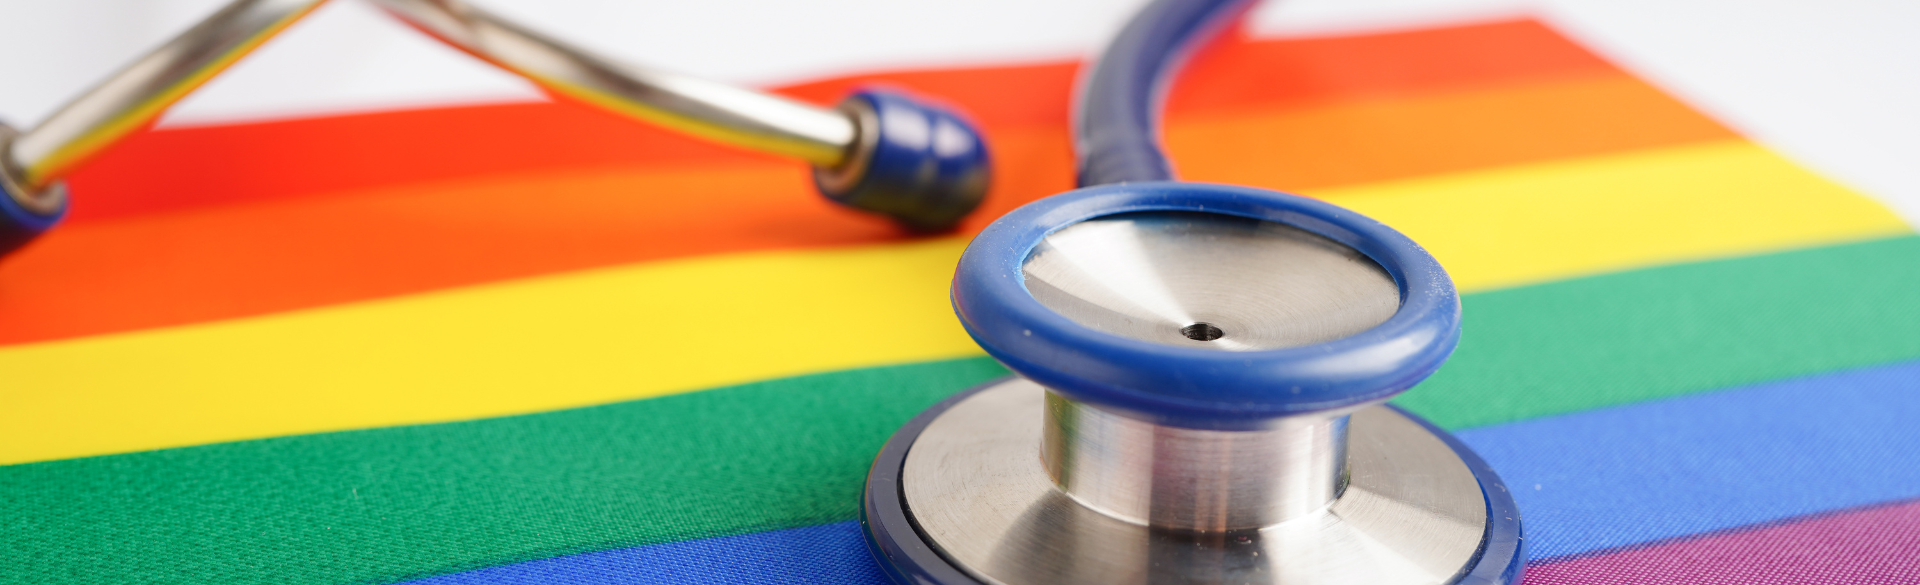 New Study Shows LGBT Adults Face More Discrimination in Health Care